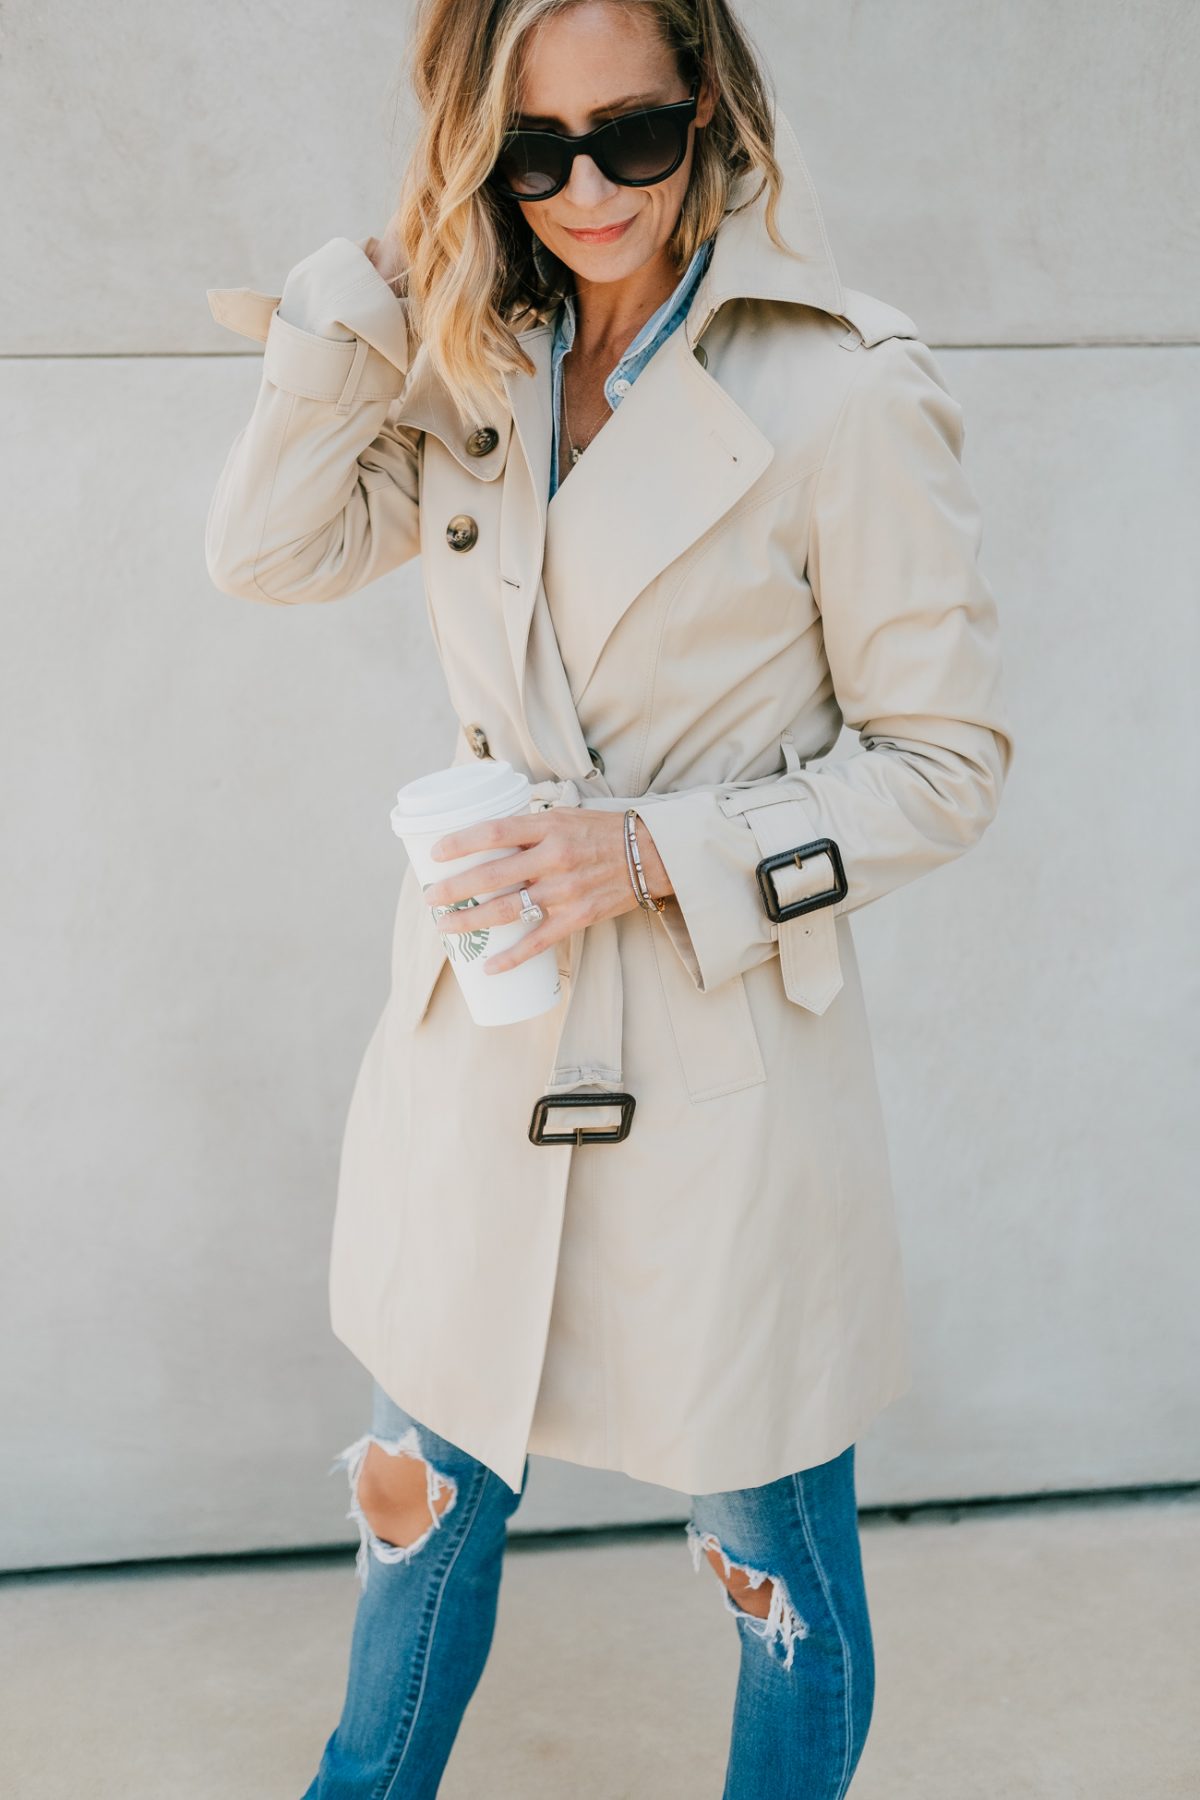 How To Dress Down A Trench Coat For Fall - My Kind of Sweet